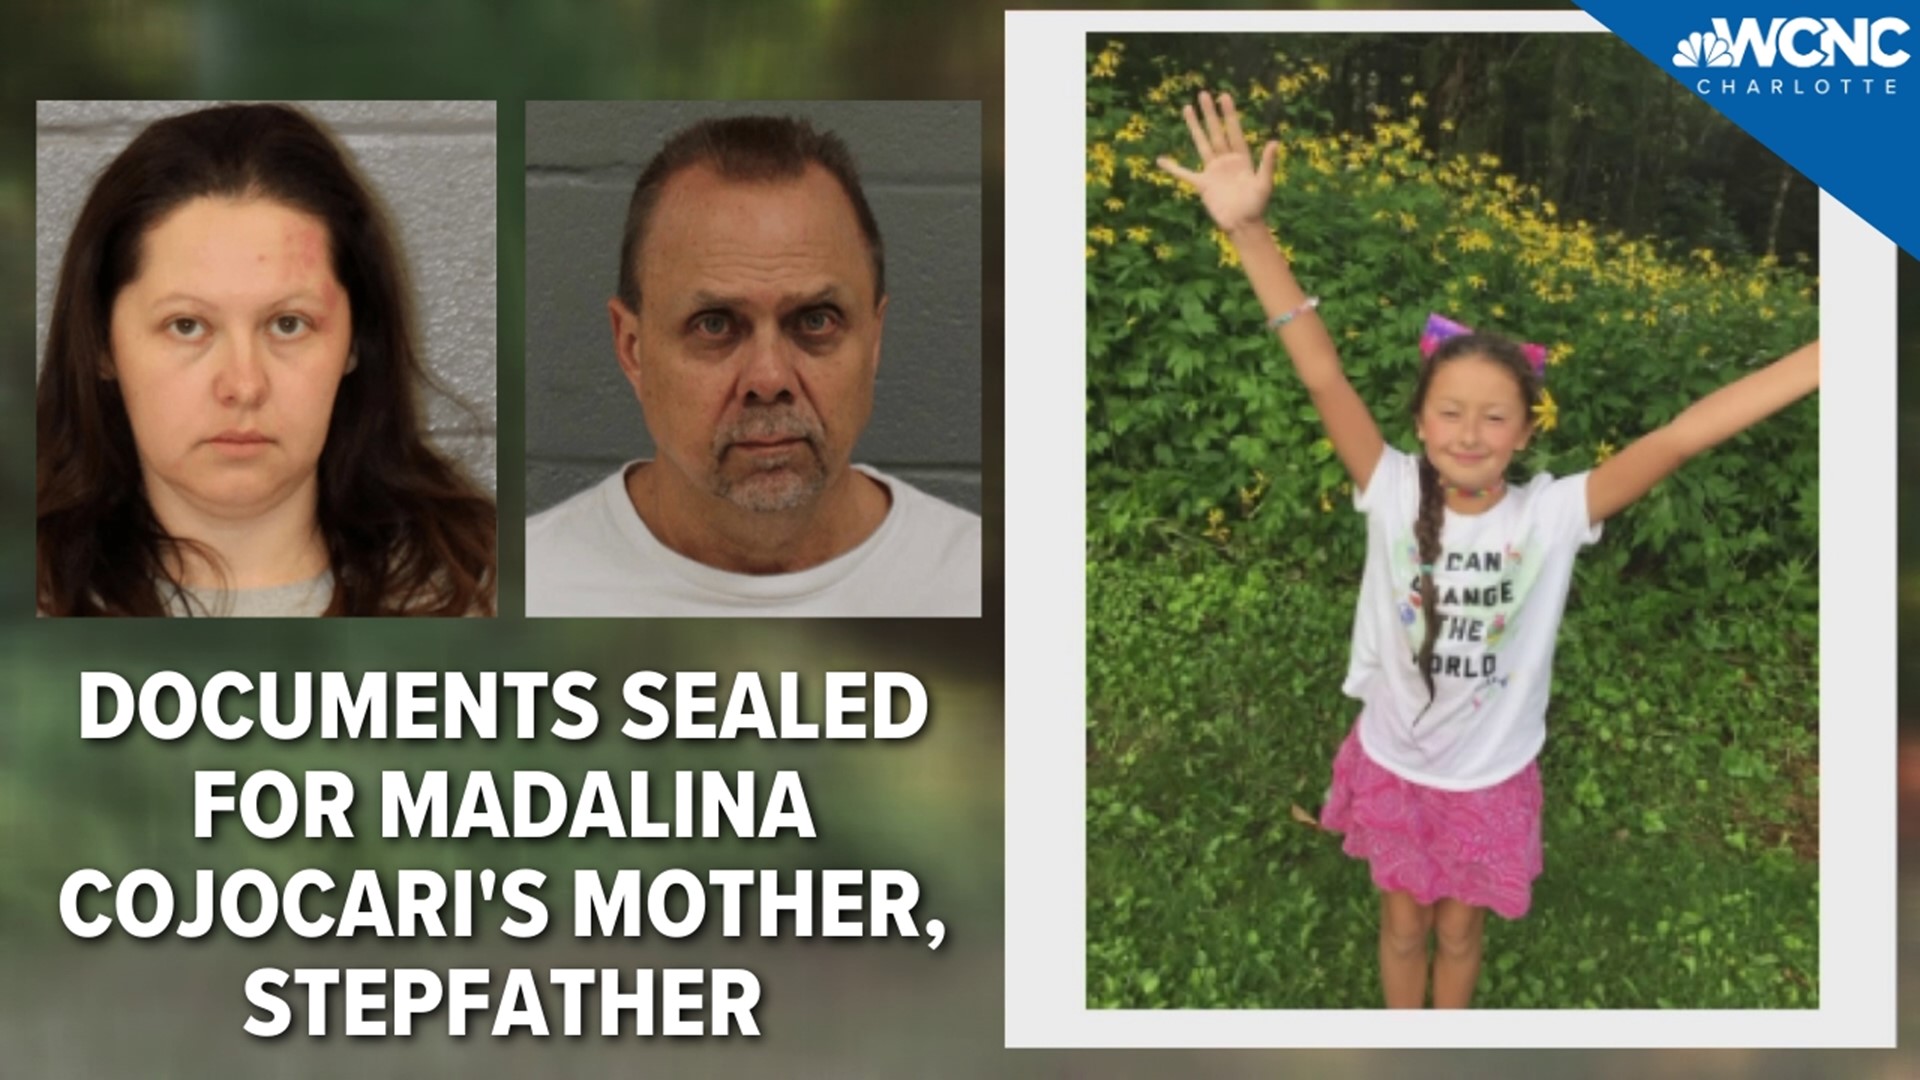 The search for 11-year-old Madalina Cojocari continues and the records WCNC Charlotte requested are giving more insight into why a judge sealed the search warrants.